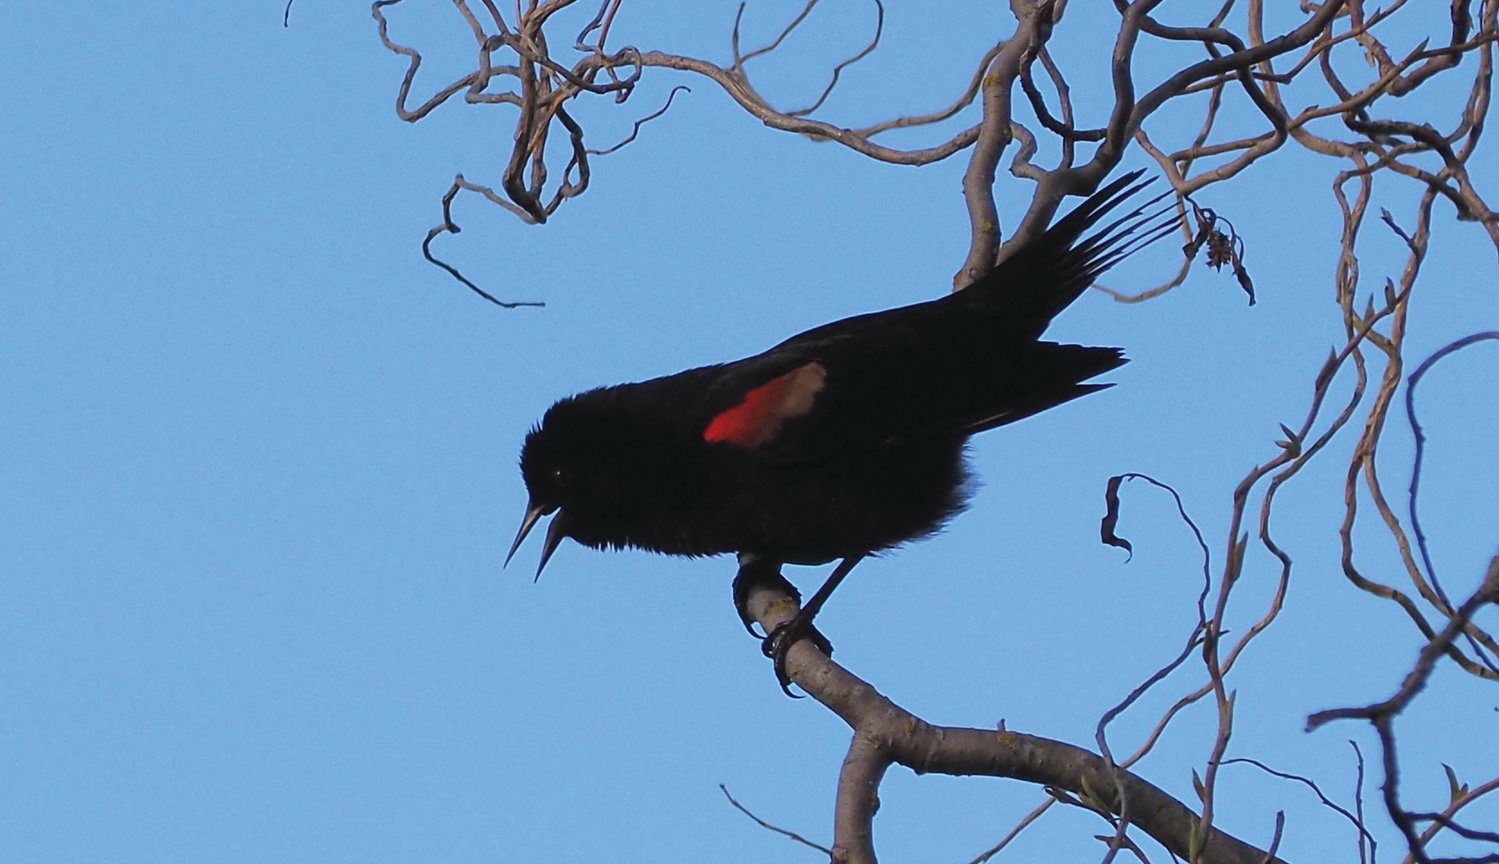 The male red-winged blackbird enthusiastically sings to establish his territory while courting the female.